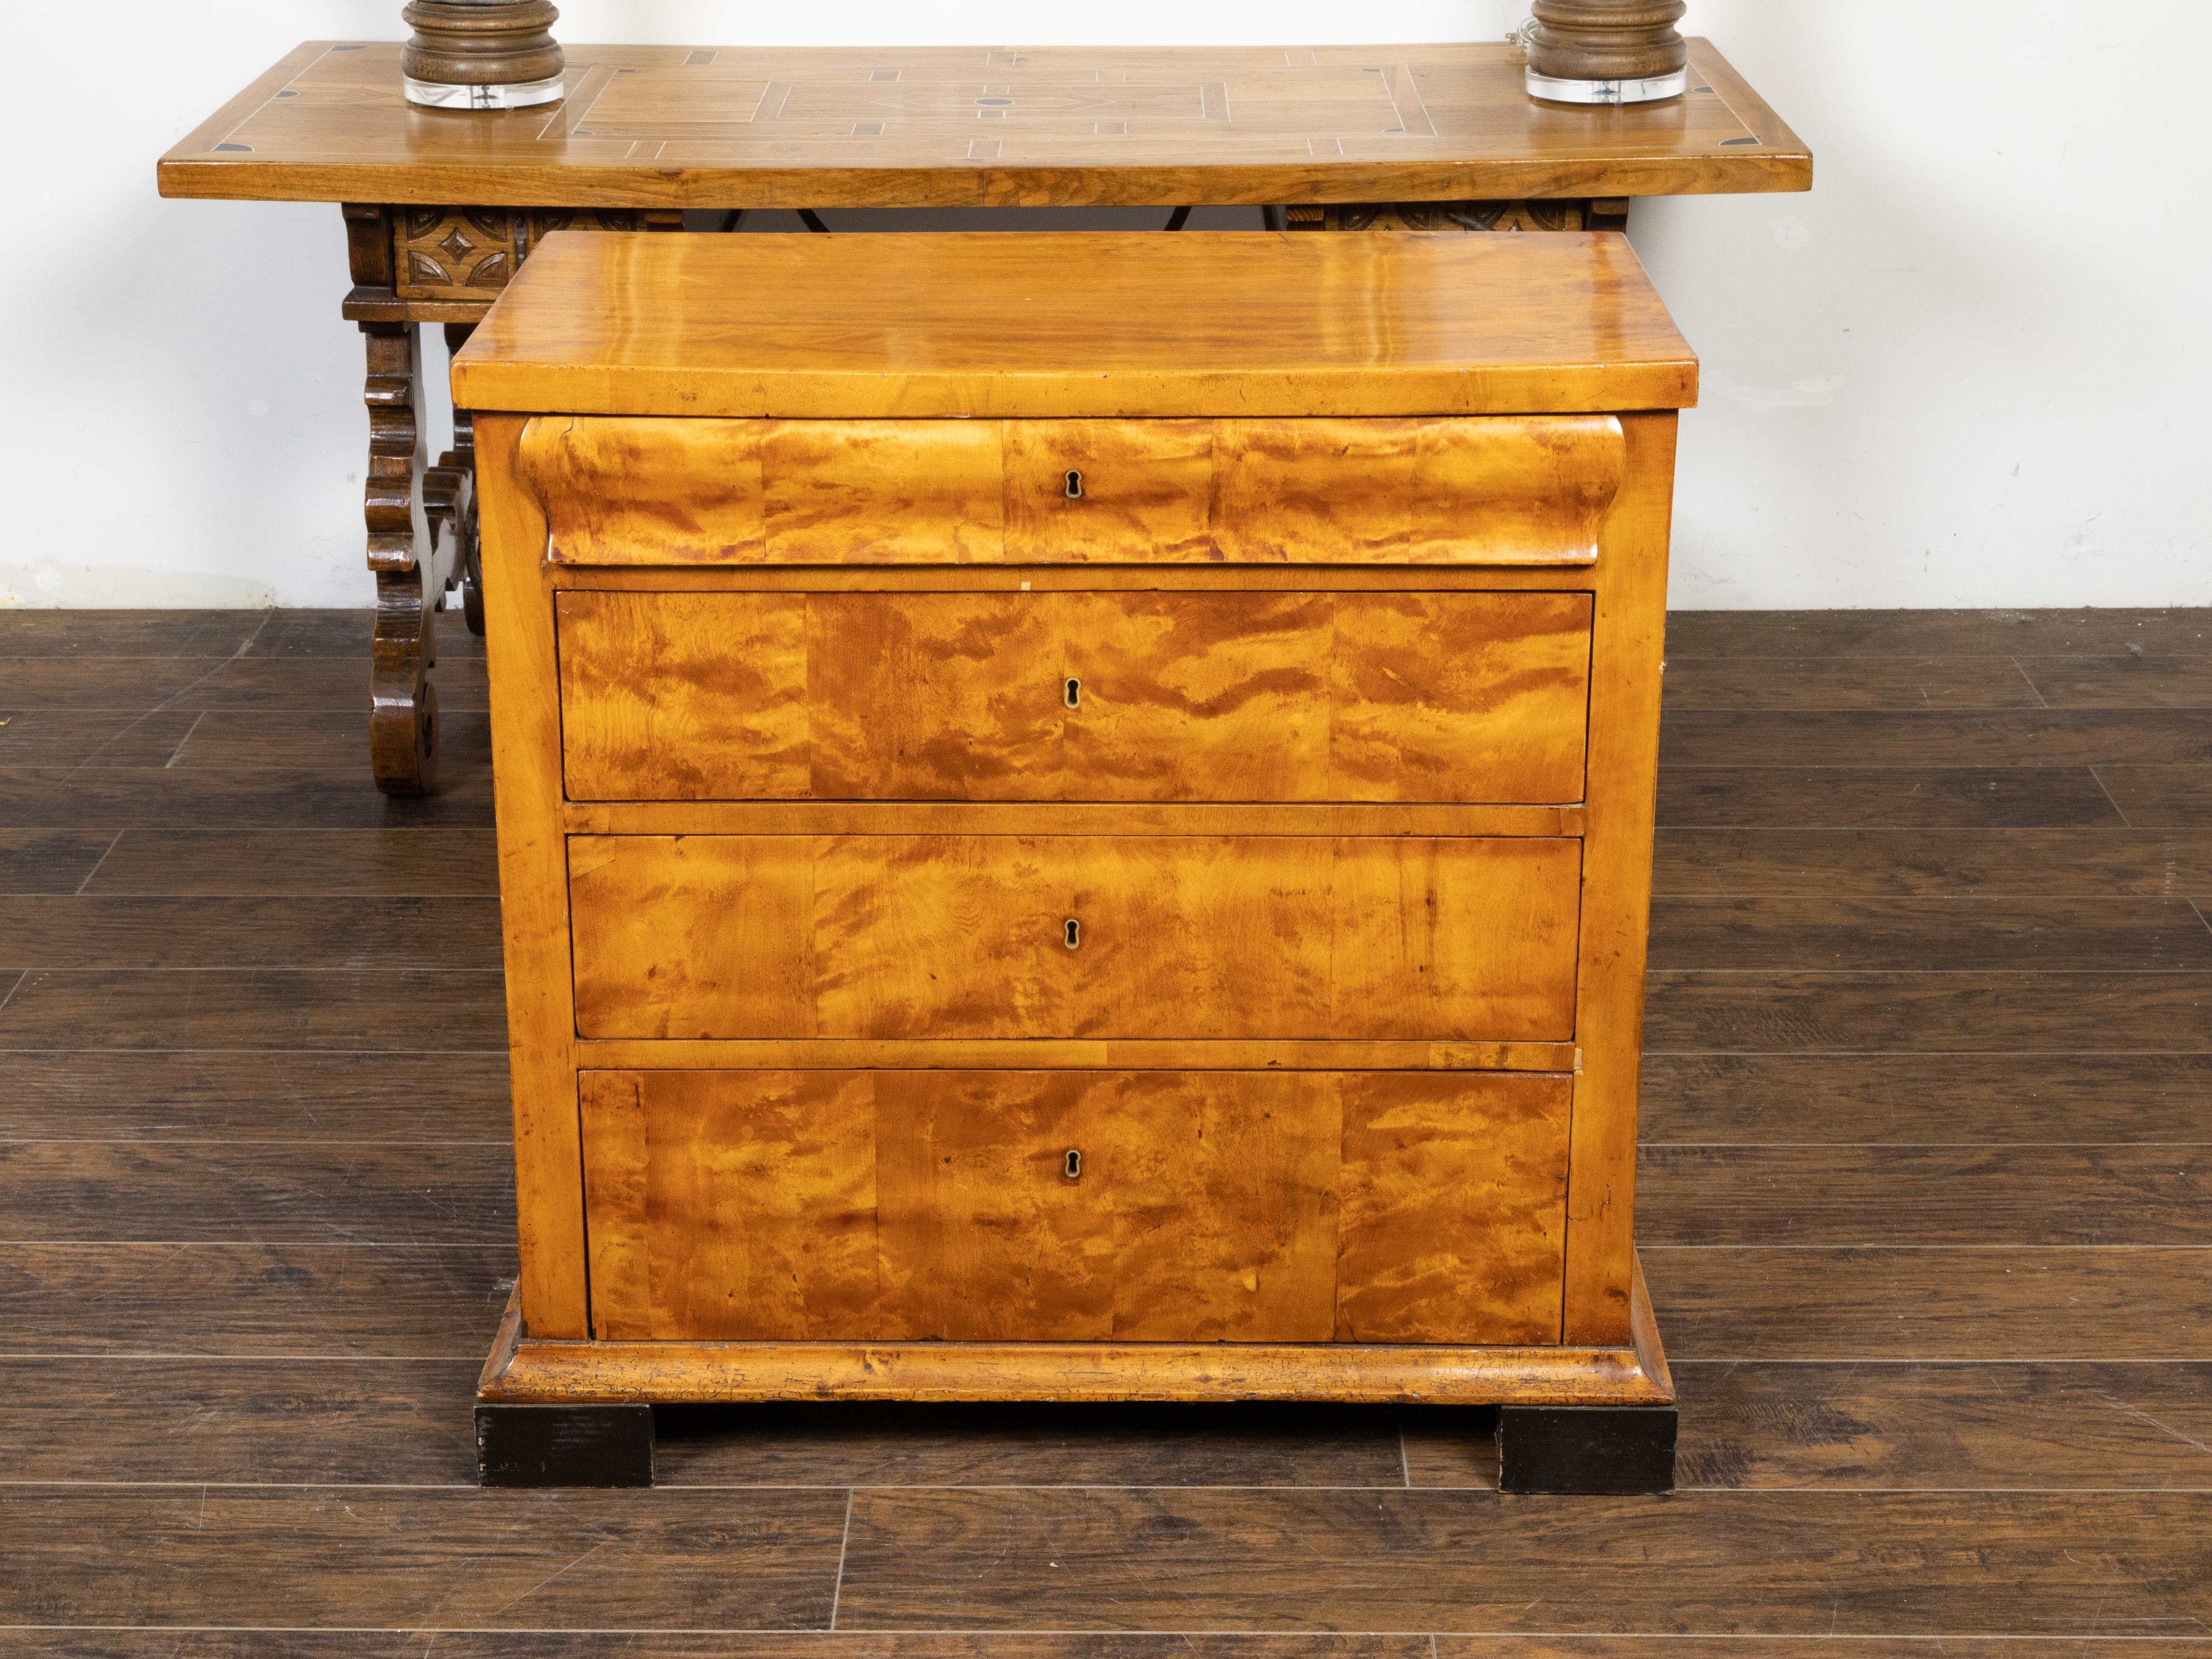 An Austrian Biedermeier period walnut veneered commode from the 19th century with four graduated drawers and rectangular ebonized block feet. Created in Austria during the 19th century, this Biedermeier commode features a rectangular top sitting